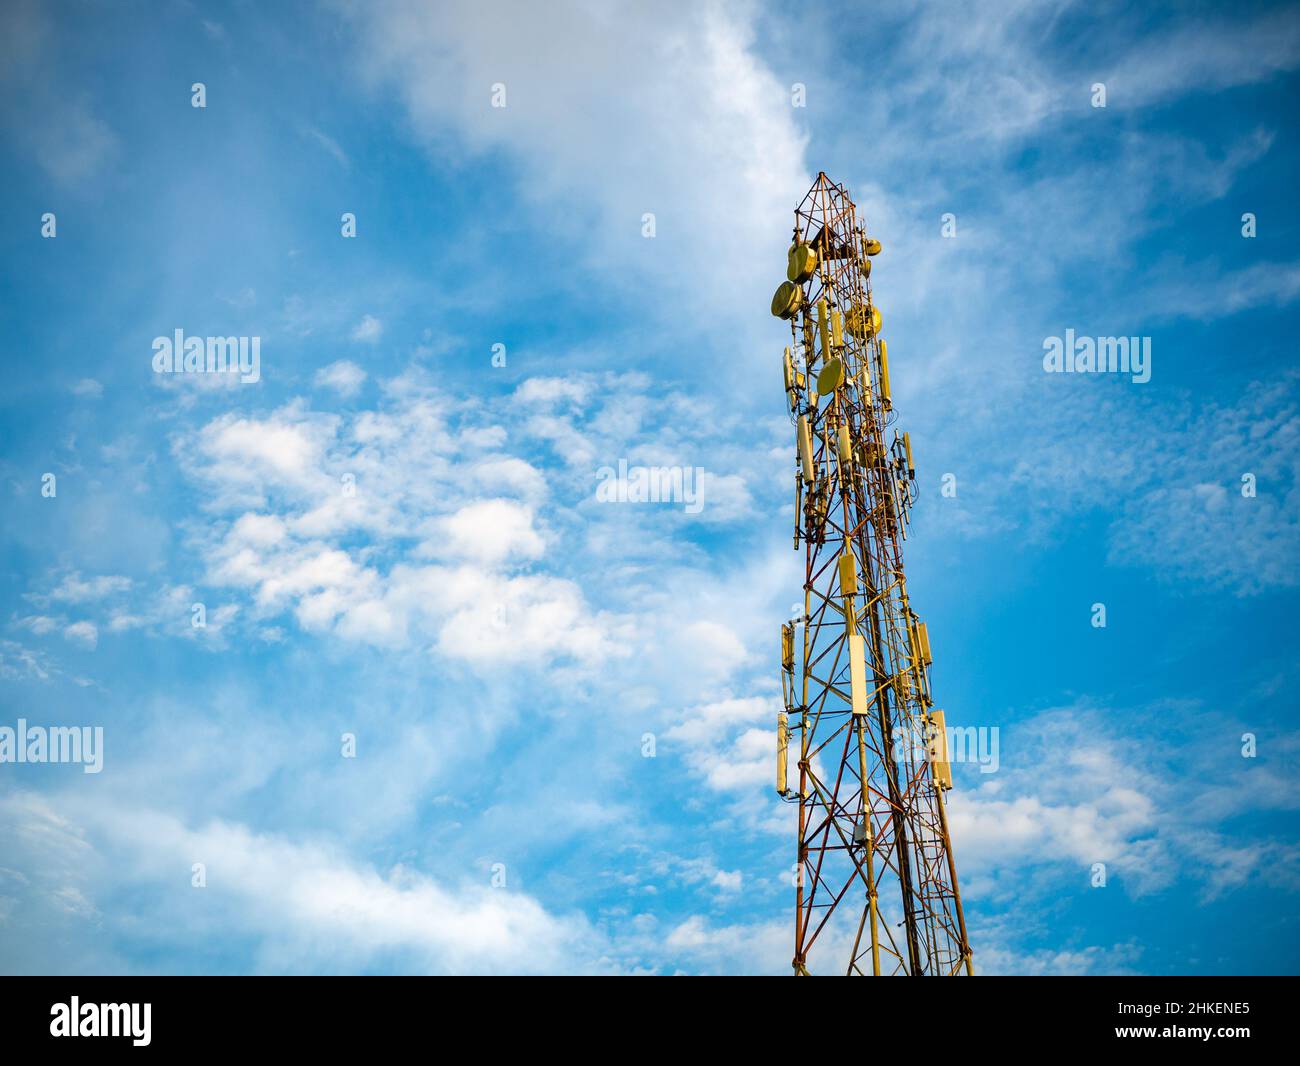 Mobile telecommunication tower or cell tower with antennae and electronic communications equipments Stock Photo